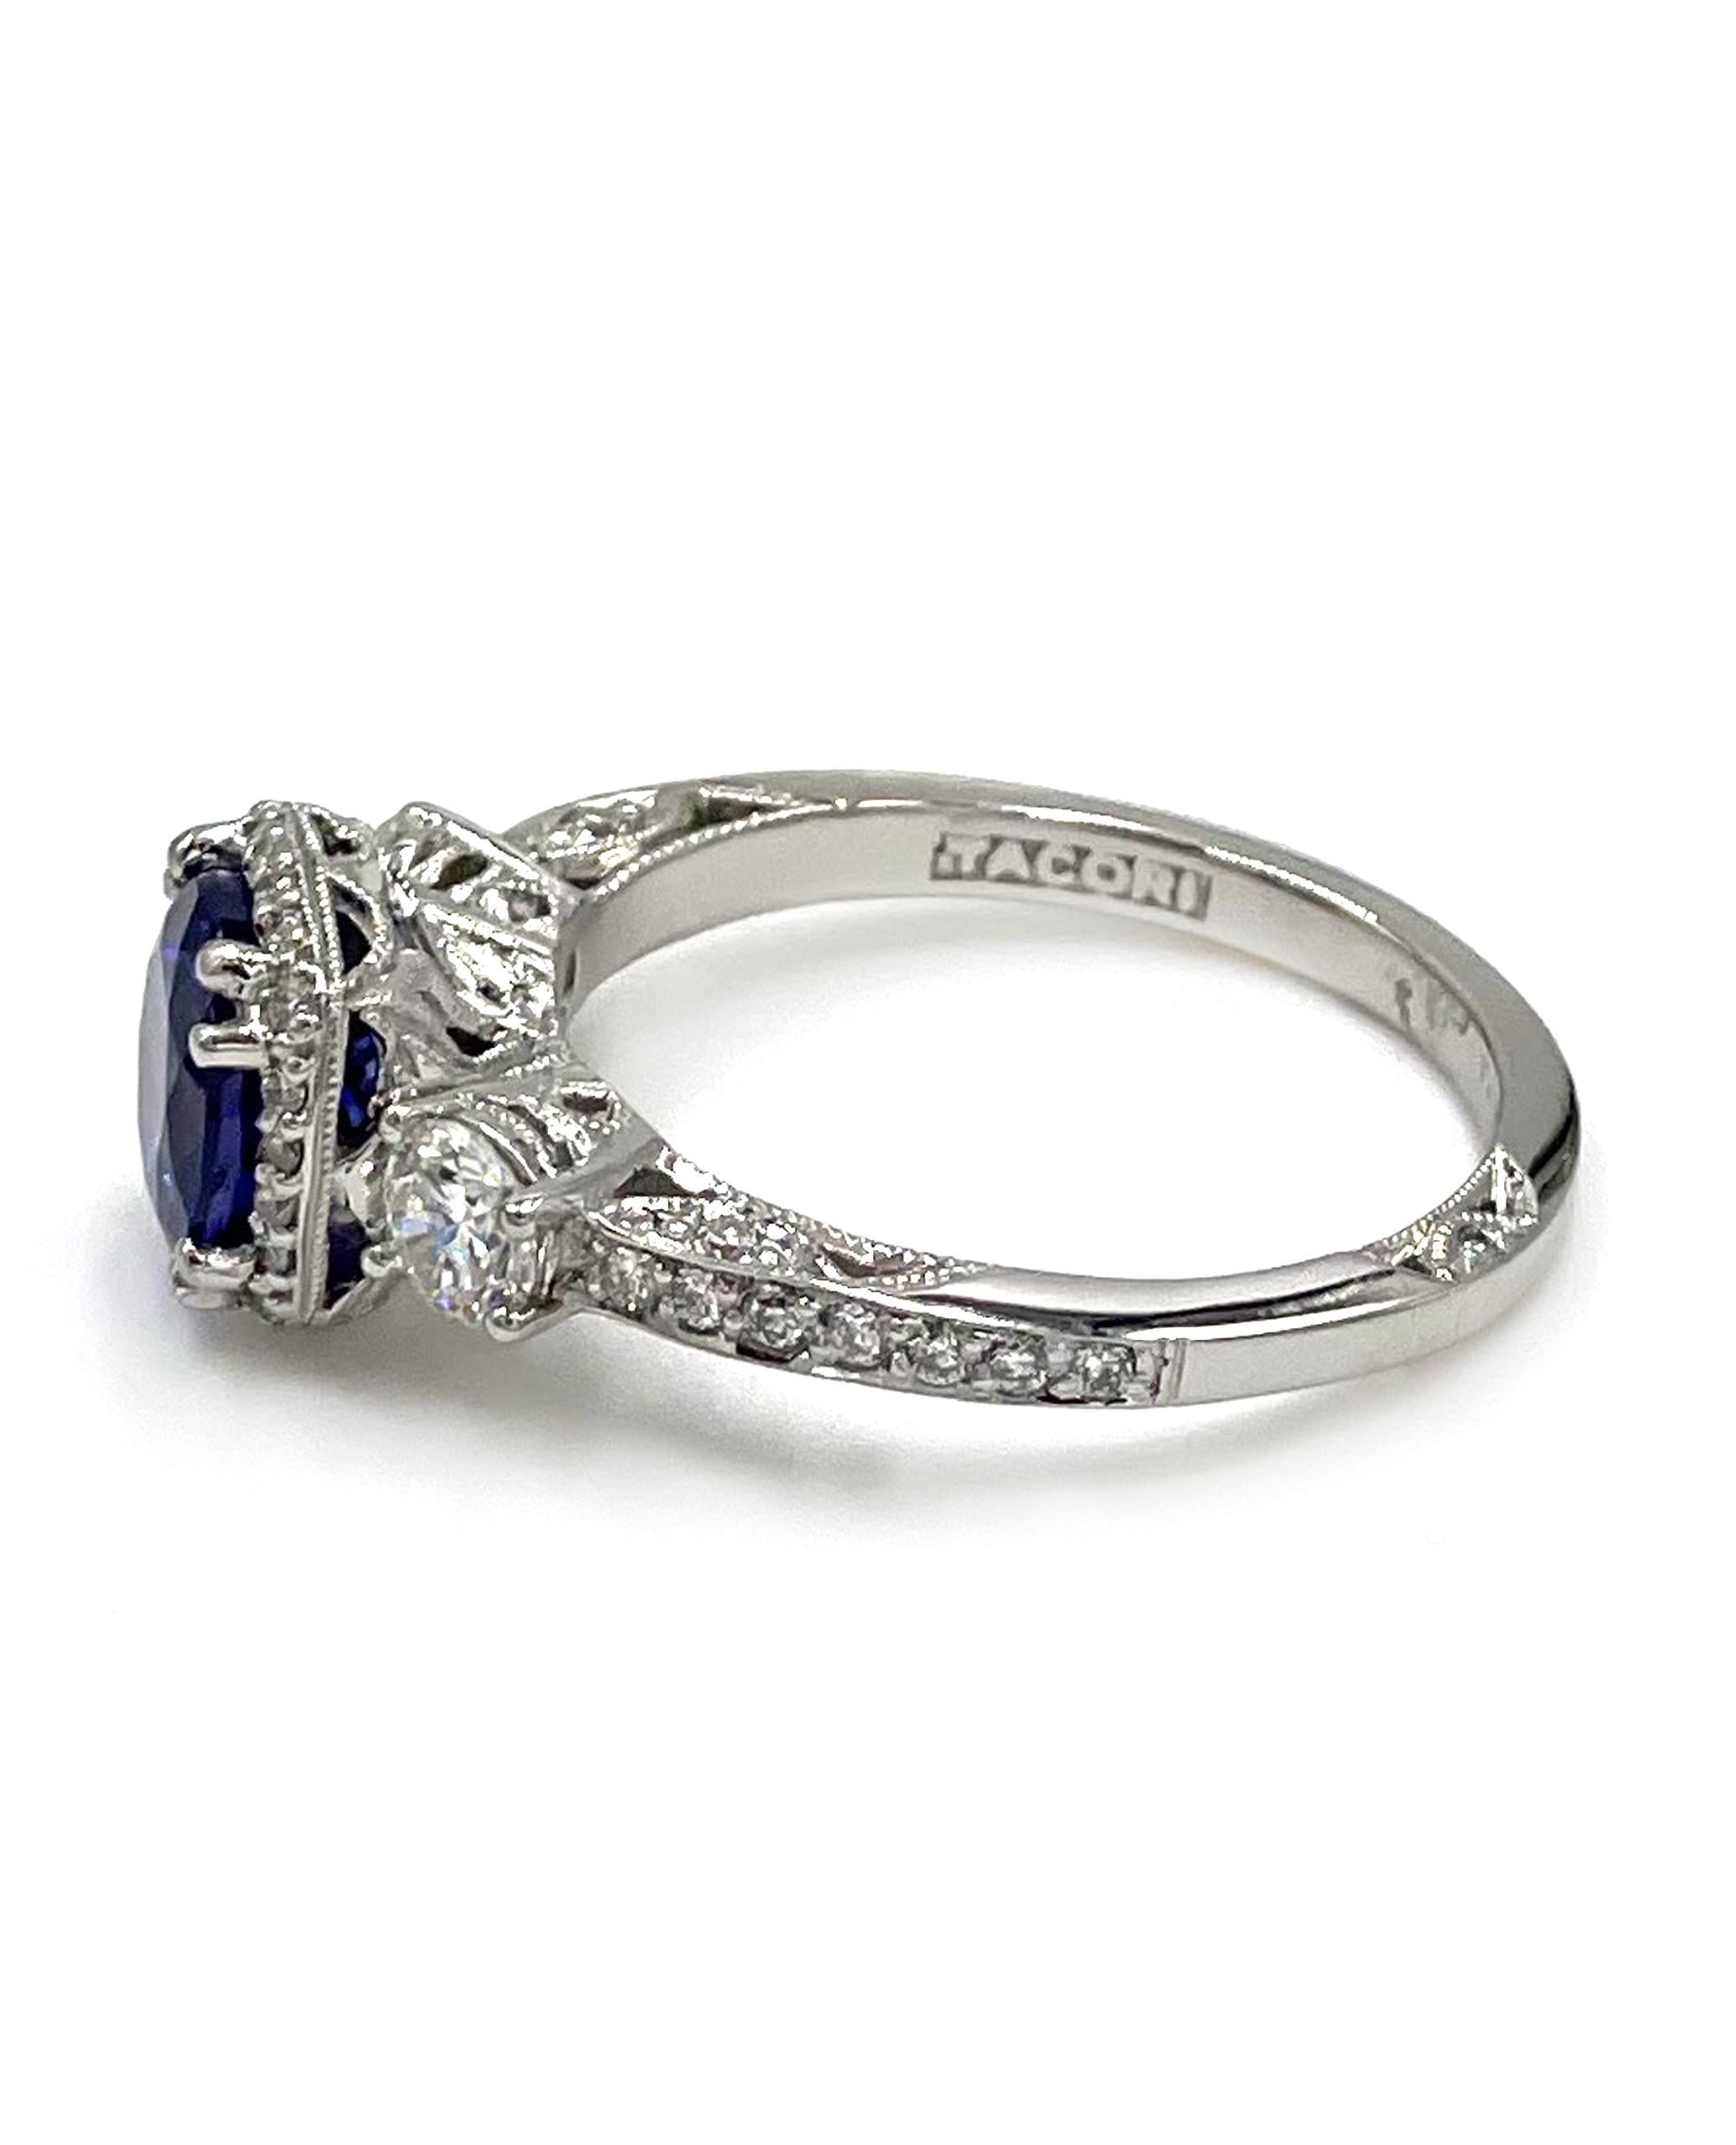 Tacori platinum“Dantela” Collection three stone ring with diamonds totaling 0.68 carats (G Color, VS Clarity) and one center round, brilliant-cut tanzanite totaling 1.59 carats.

- Style no. 2623RDMDP
- Finger size 6.5
- Comes with original Tacori